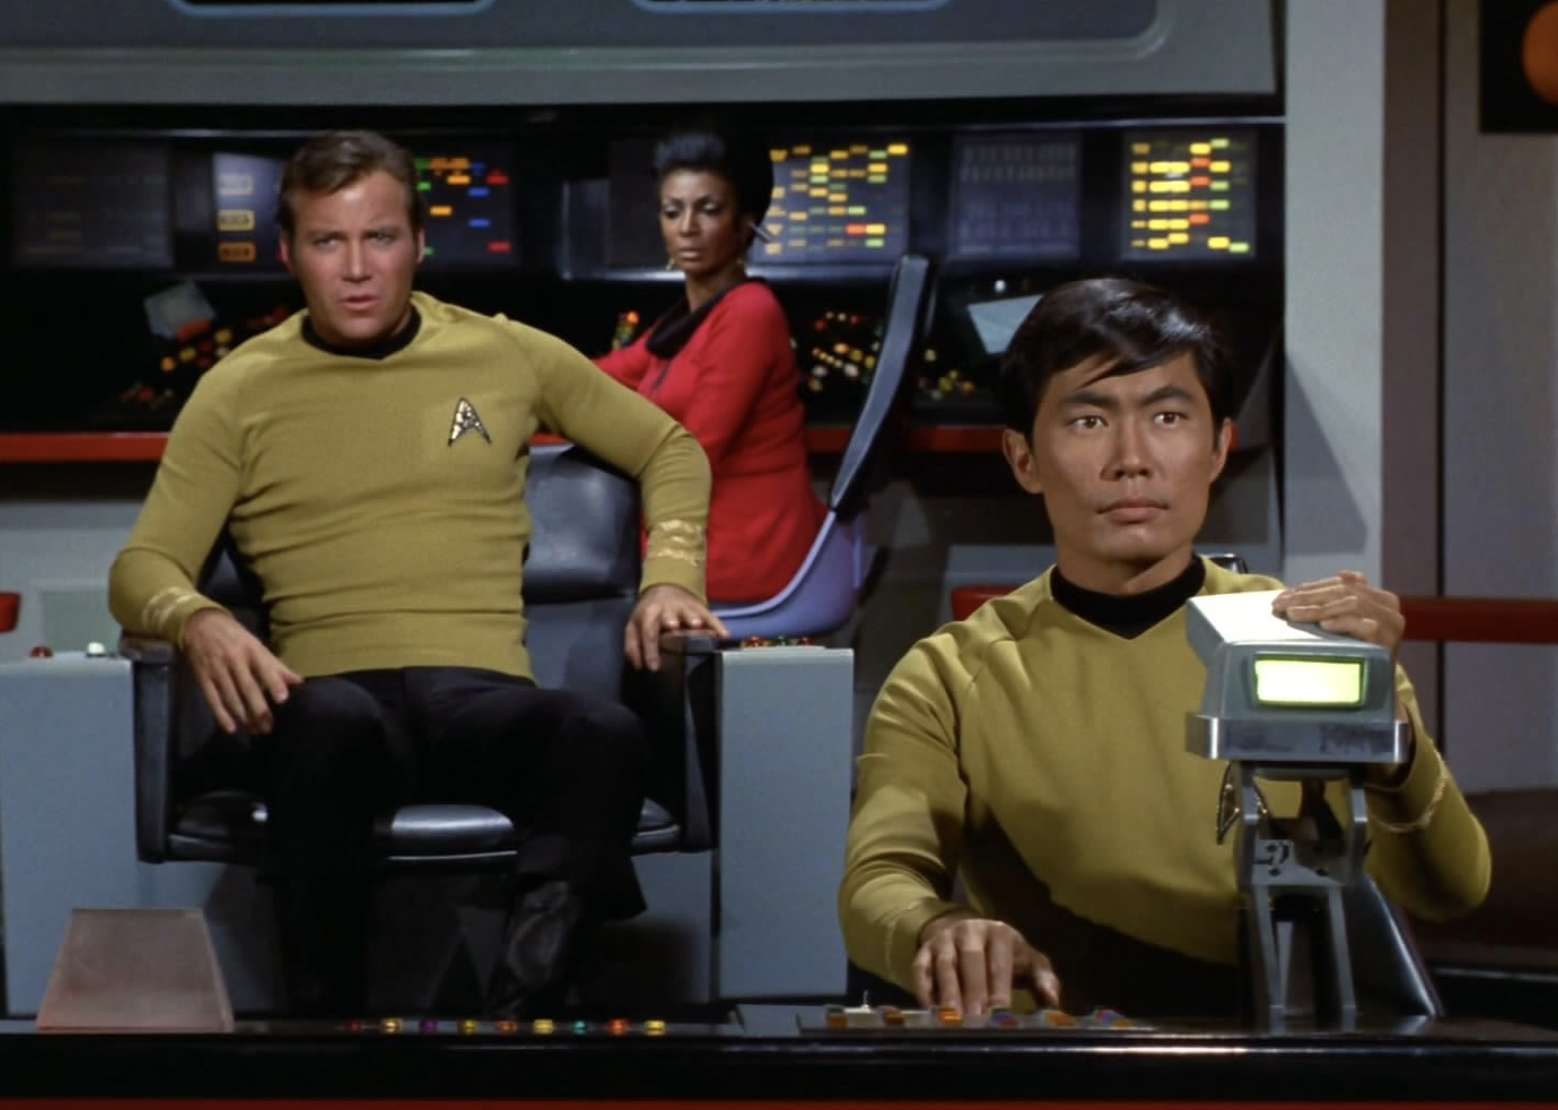 <p>- IMDb user rating: 7.7<br> - Season 3, Episode 7<br> - Director: Marvin J. Chomsky</p>  <p>The seventh episode of the third season of "Star Trek" once again pitted the Enterprise crew against the brutal Klingons. A being of pure energy creates confusion between the two factions, inserting false memories and creating conflict—in one instance, Chekov becomes aggressive towards the Klingons for killing a brother of his that never existed in the first place. The Klingon character of Kang, who originated from this episode, would <a href="https://screenrant.com/tar-trek-ds9-tos-klingons-kor-koloth-kang/">return in the "Deep Space Nine" and "Voyager" shows</a> decades later.</p>